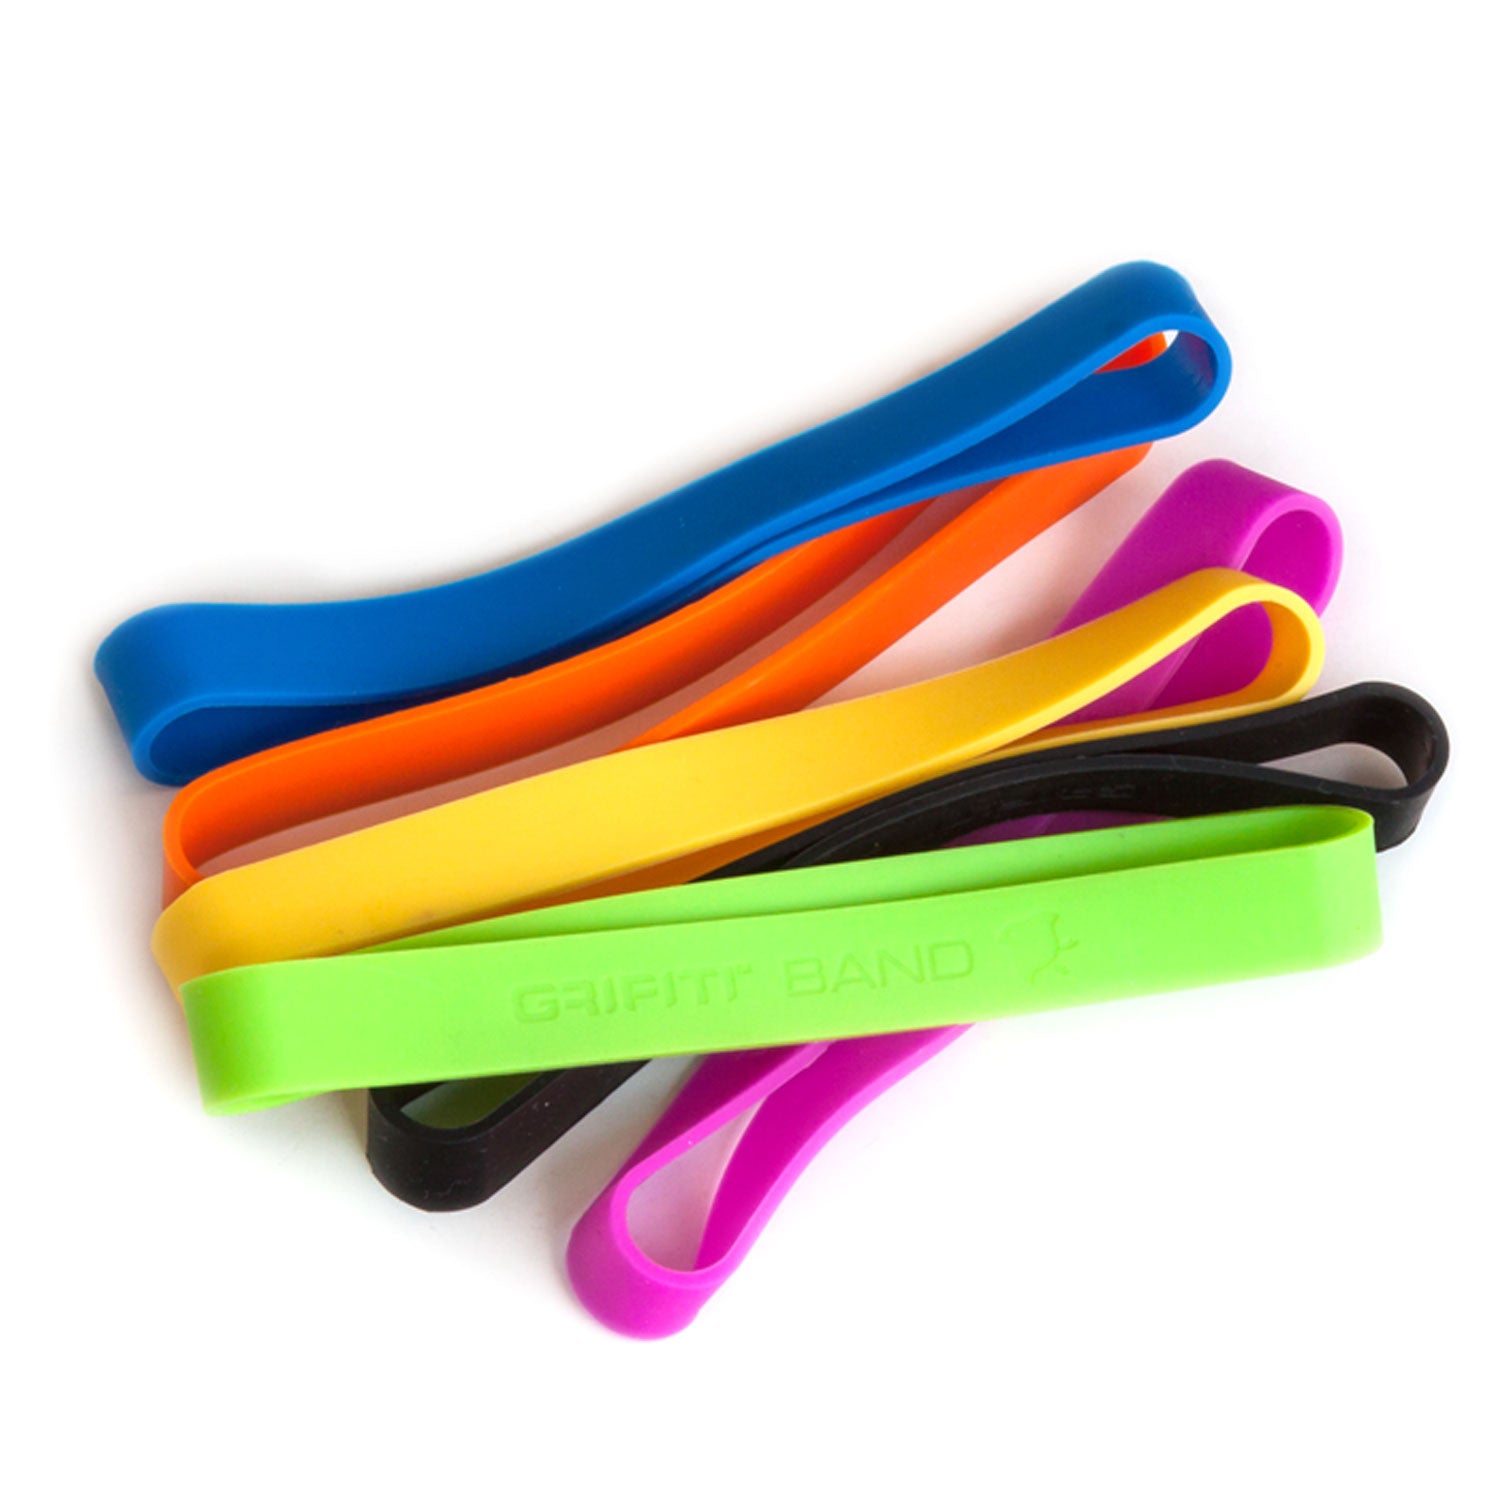 Grifiti Band Joes 6 inch Standard 20 Pack Silicone Bands Cooking Grade